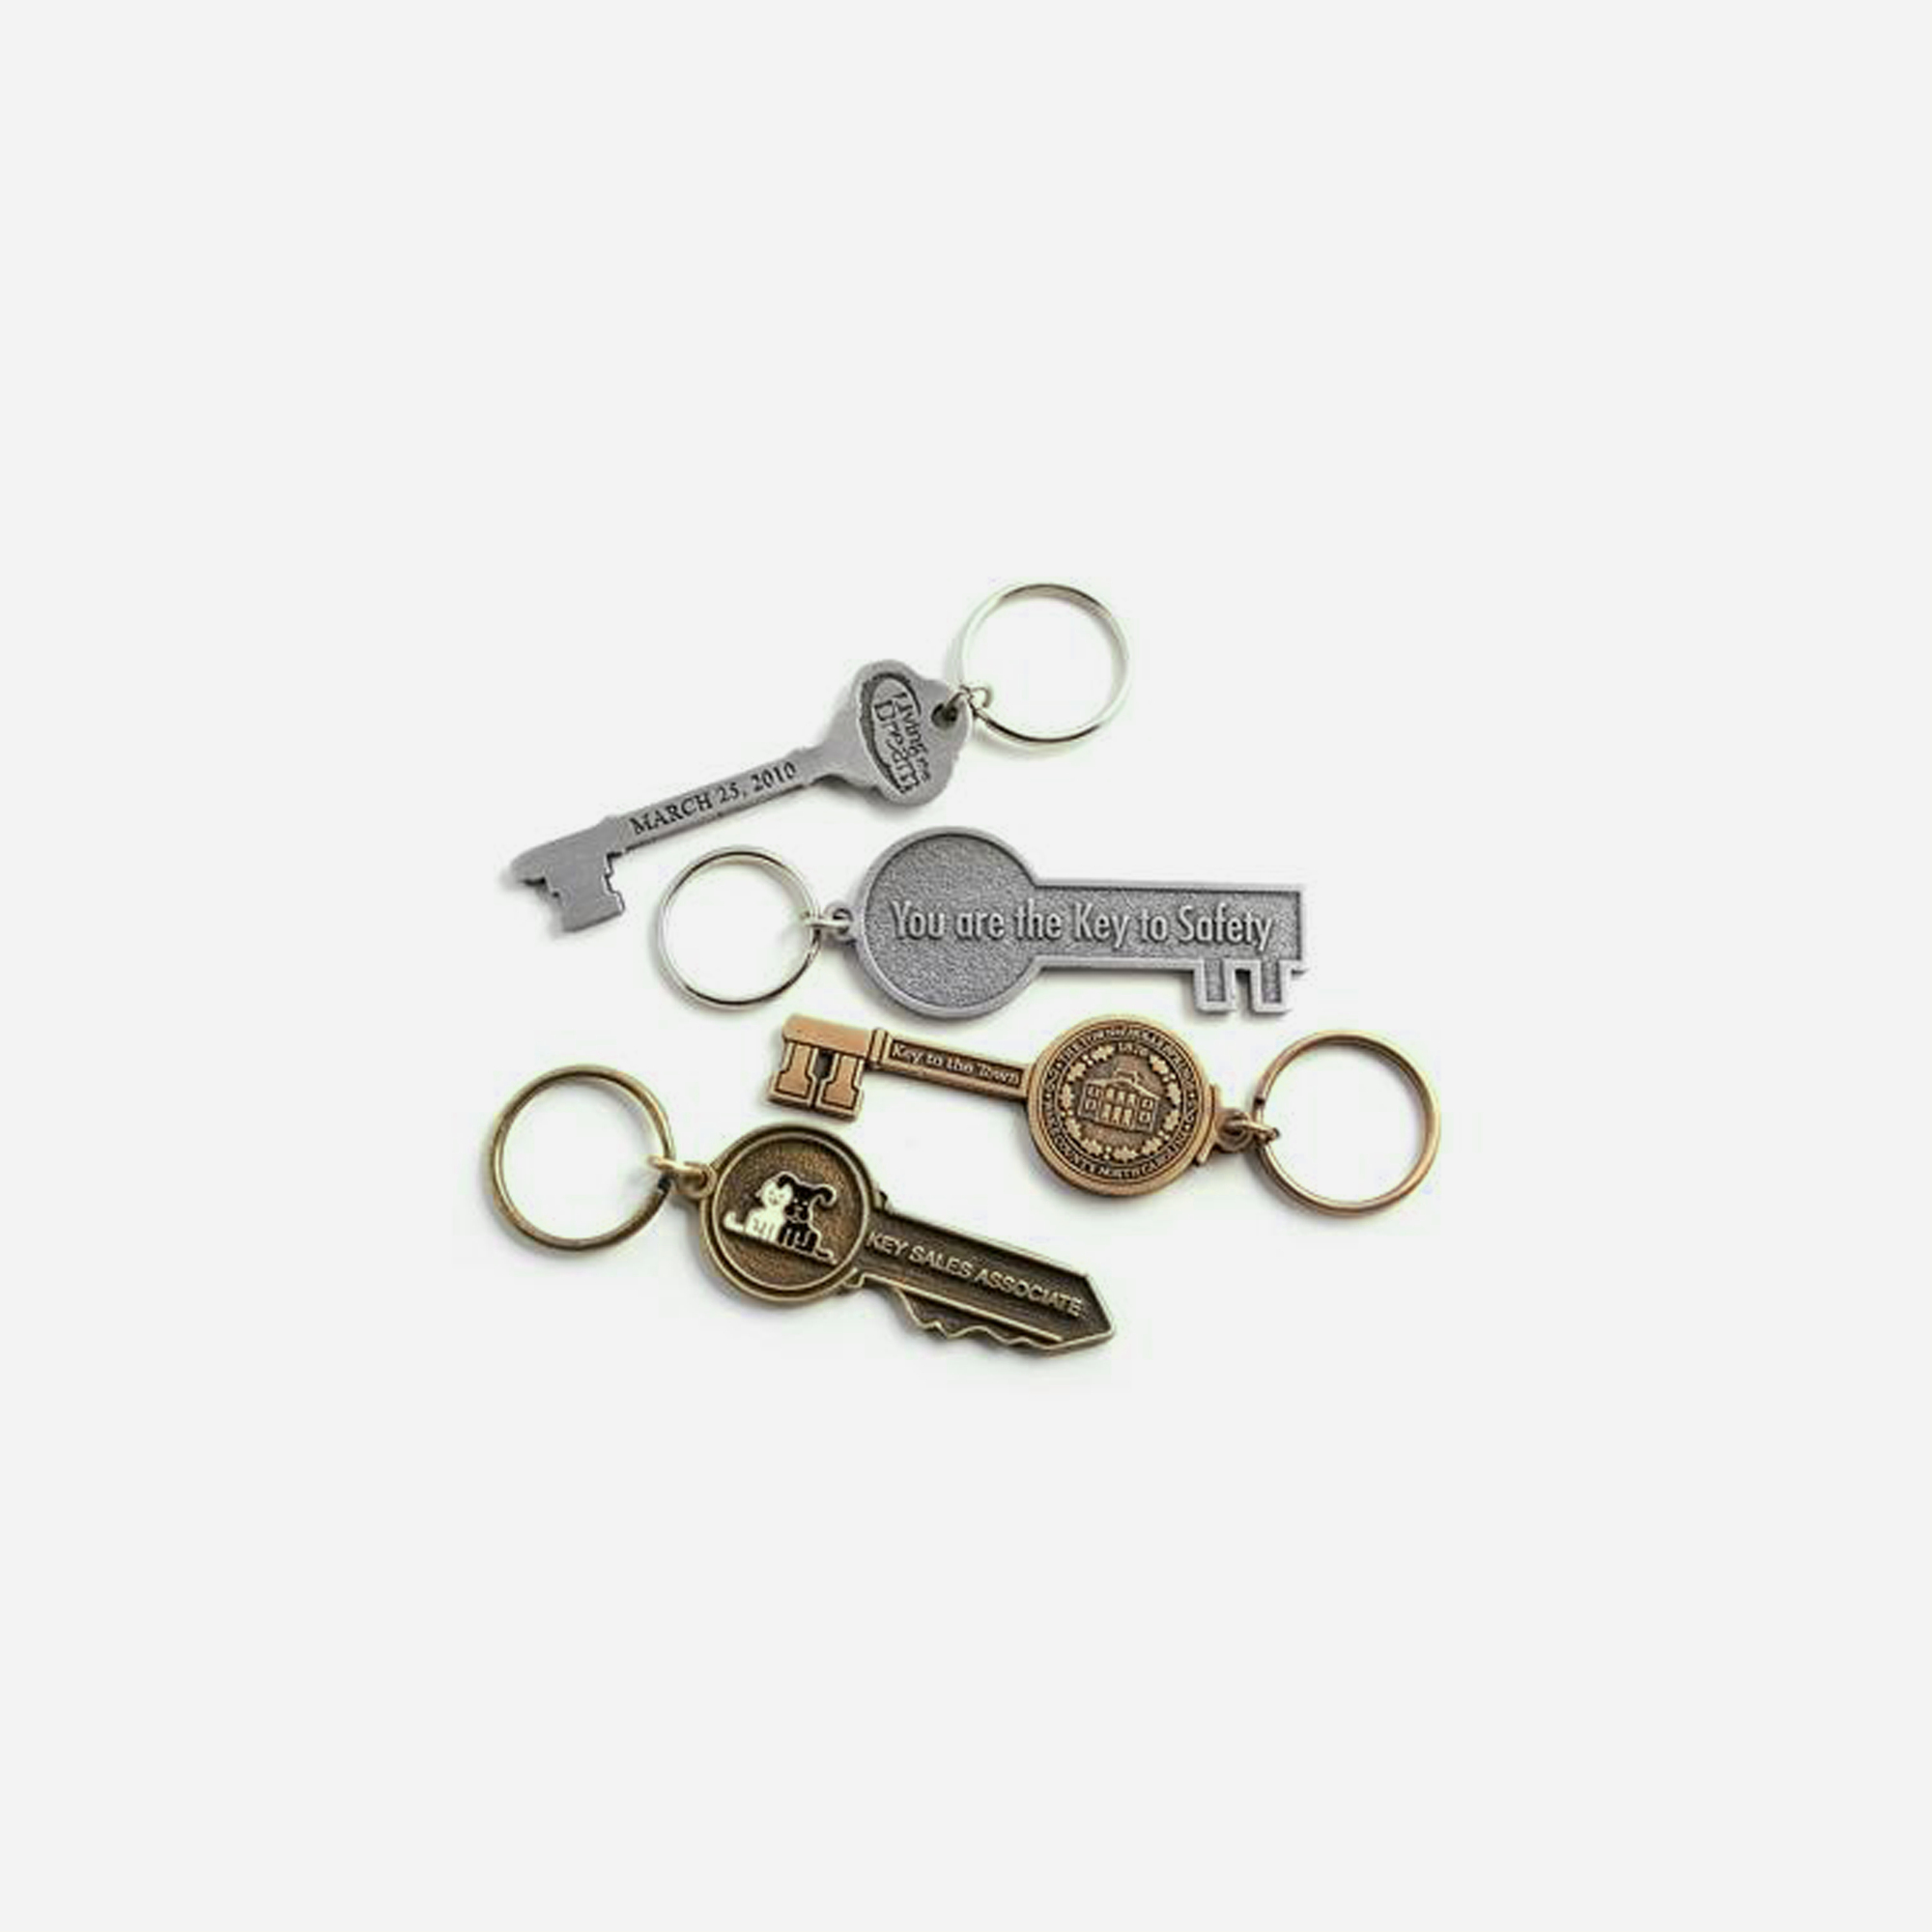 Metal Keychains 100 Pieces, Keychain Ring 100 Pieces